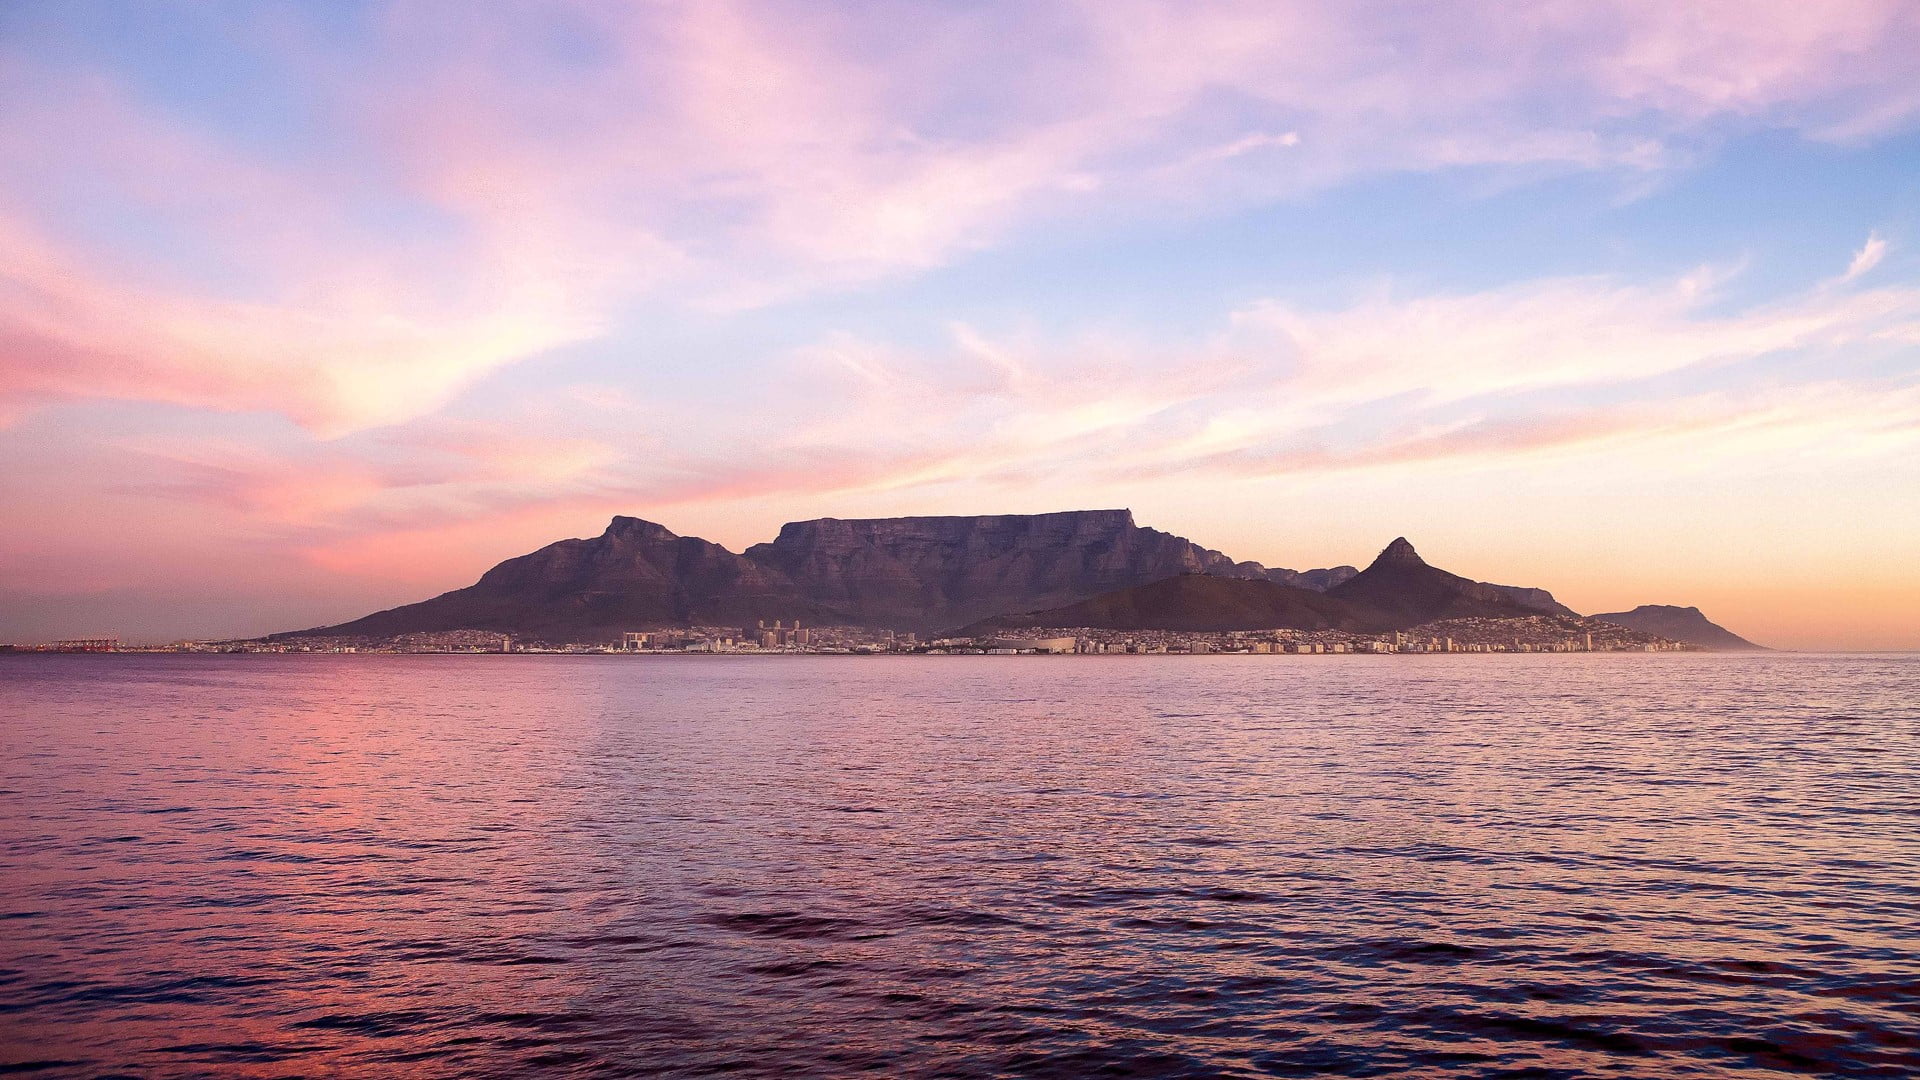 mountain and body of water, Cape Town, Table Mountain, South Africa, sea